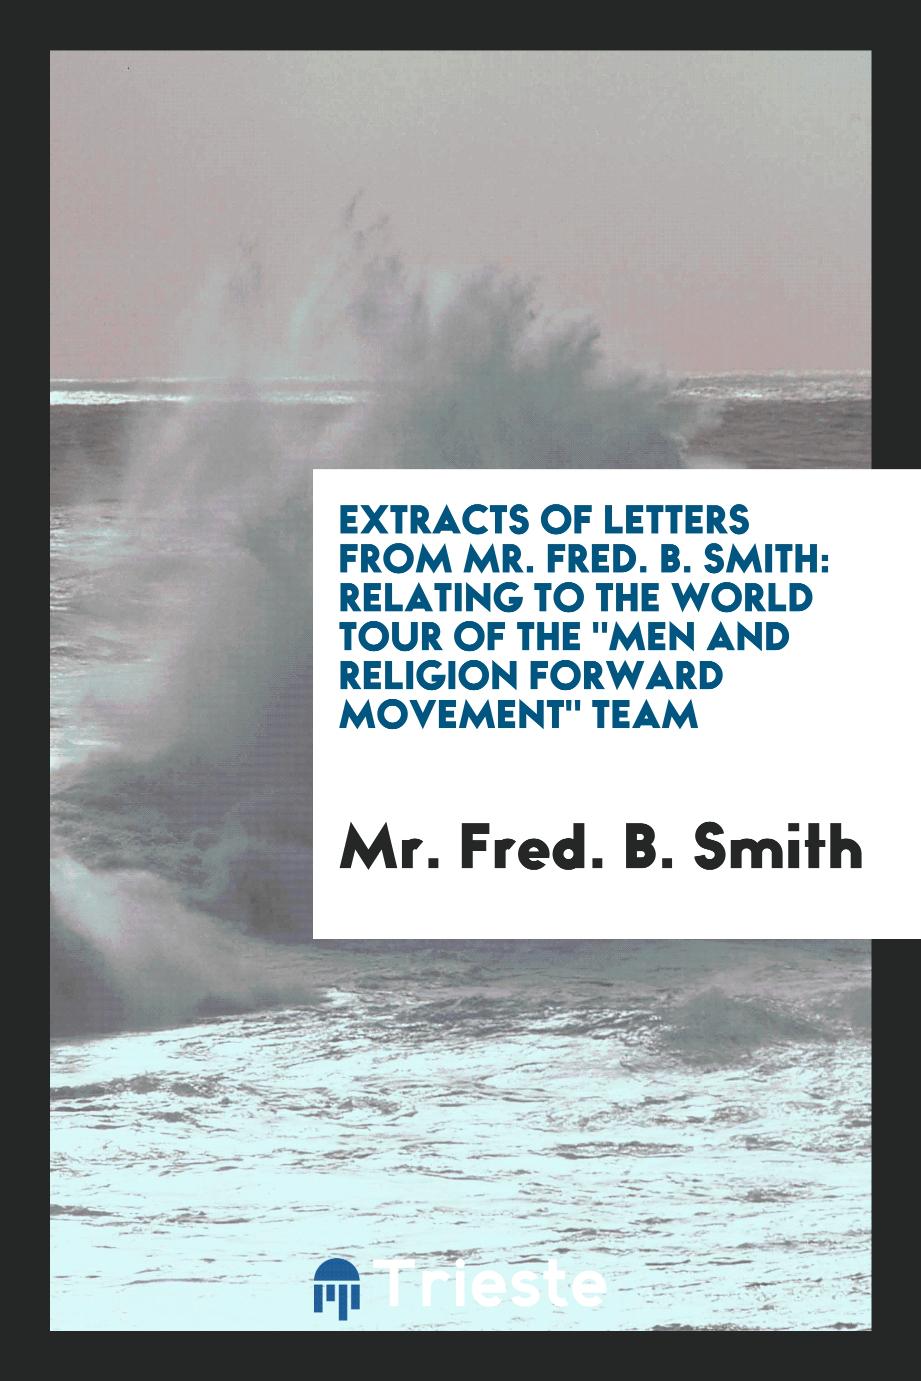 Extracts of letters from Mr. Fred. B. Smith: relating to the world tour of the "Men and Religion Forward Movement" team